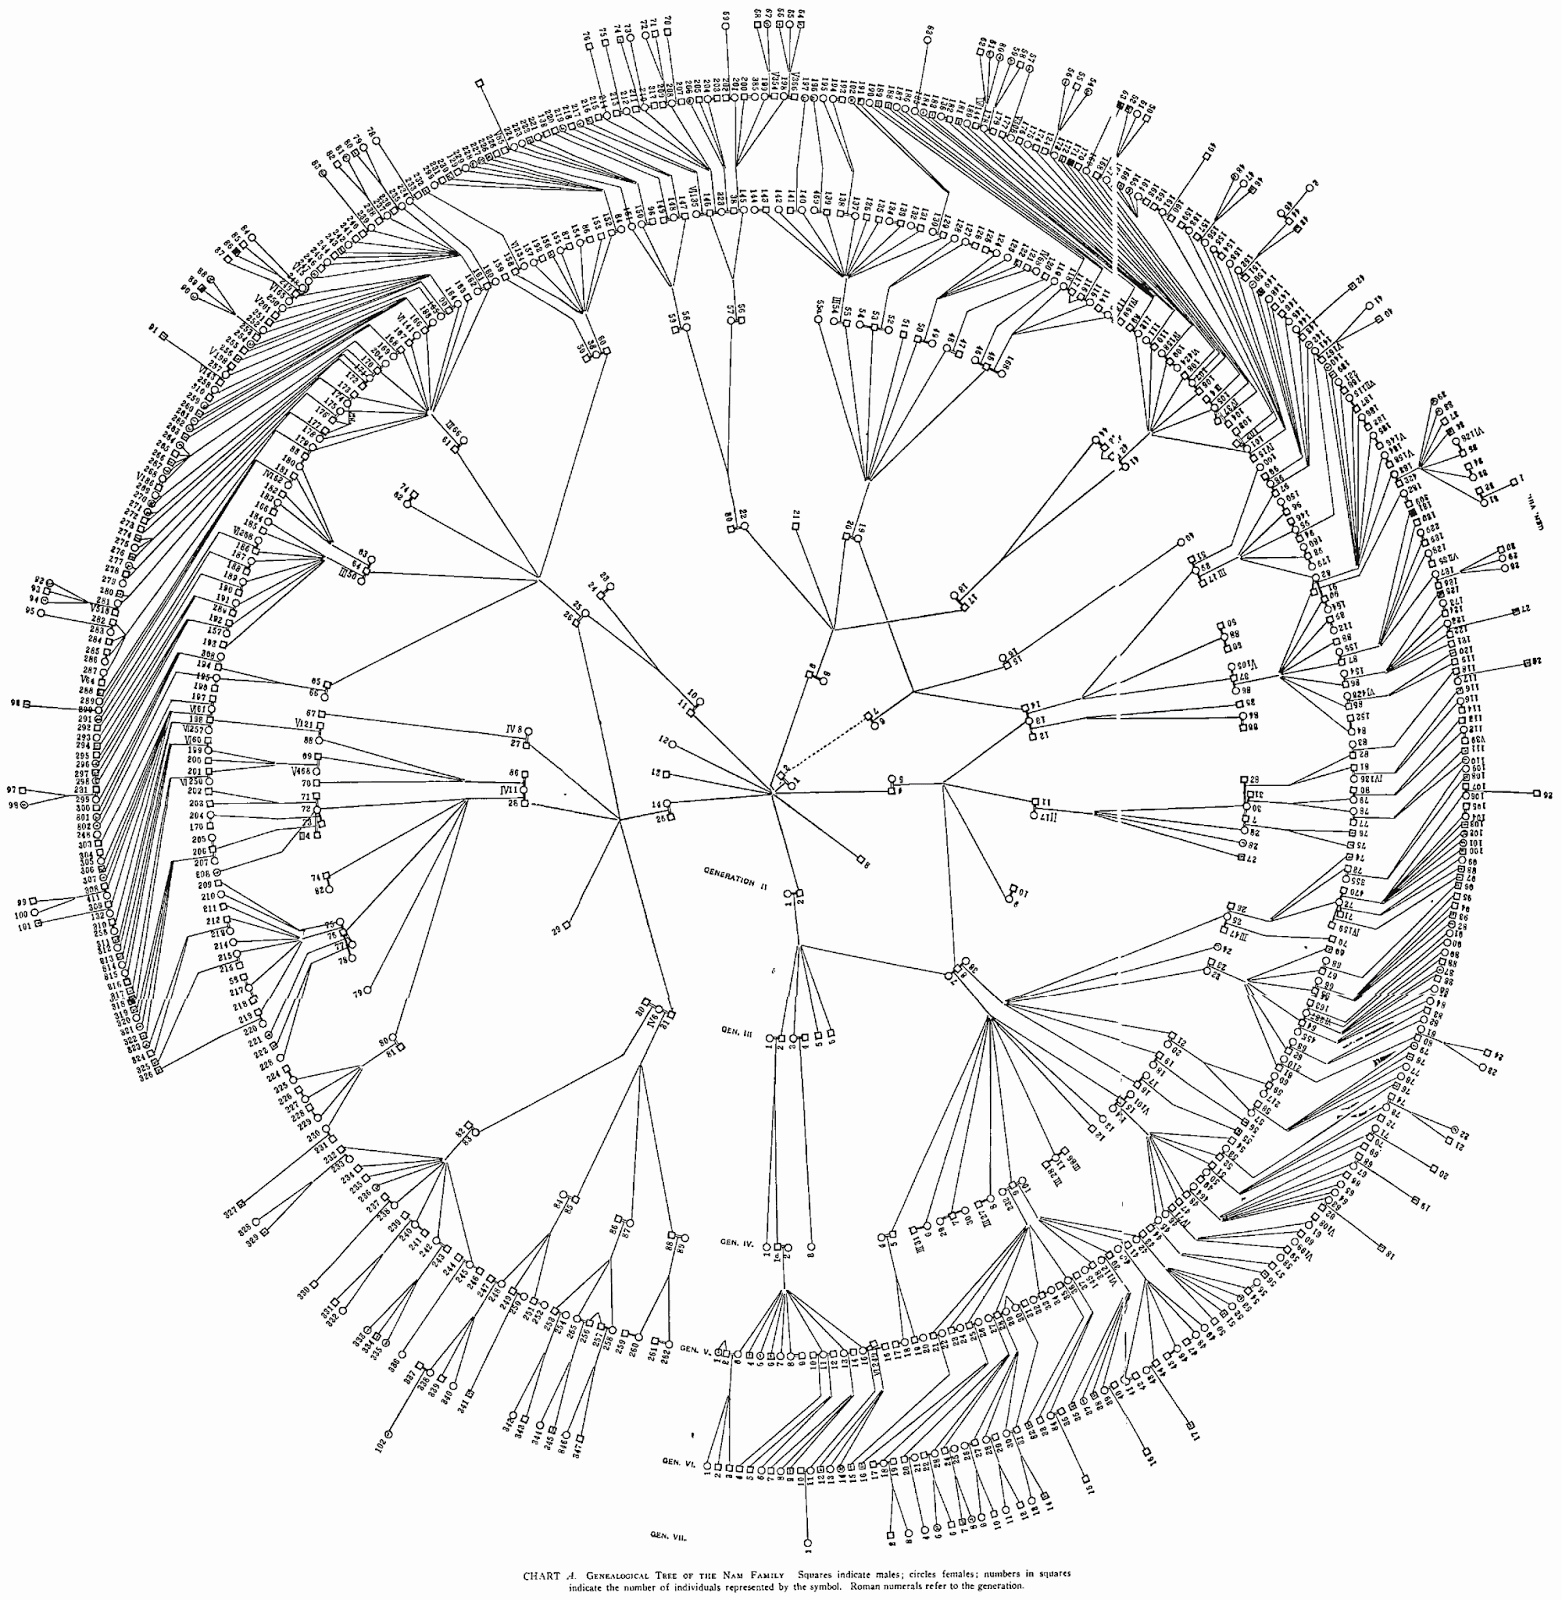 the genealogical world of phylogenetic networks circular phylograms small